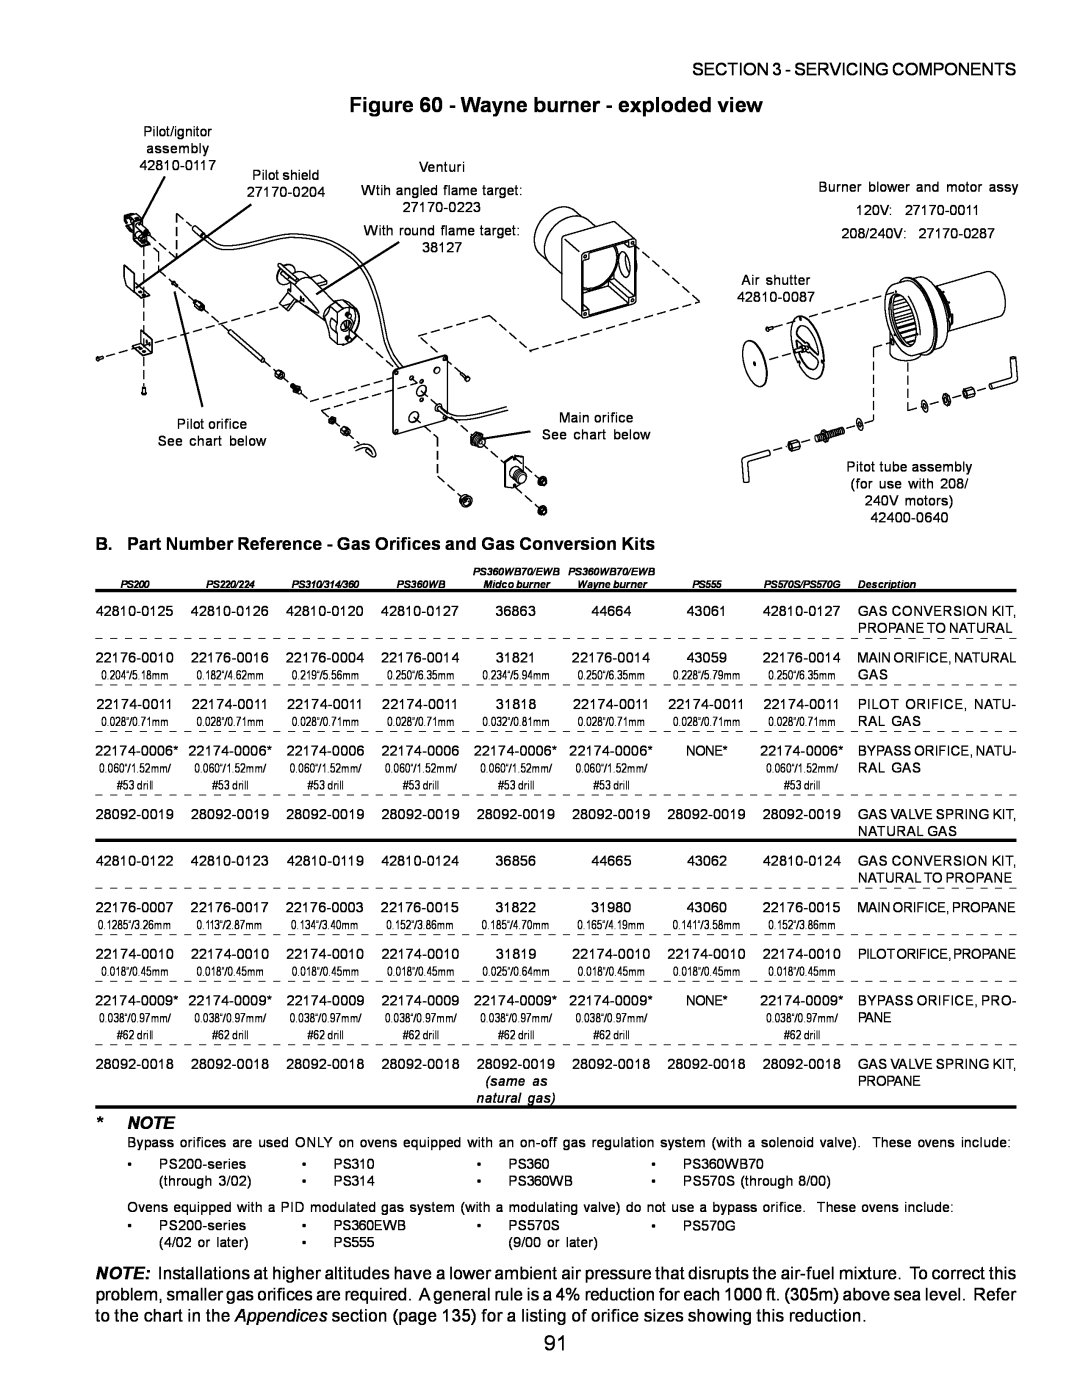 Middleby Marshall PS200 Wayne burner - exploded view, B. Part Number Reference - Gas Orifices and Gas Conversion Kits 